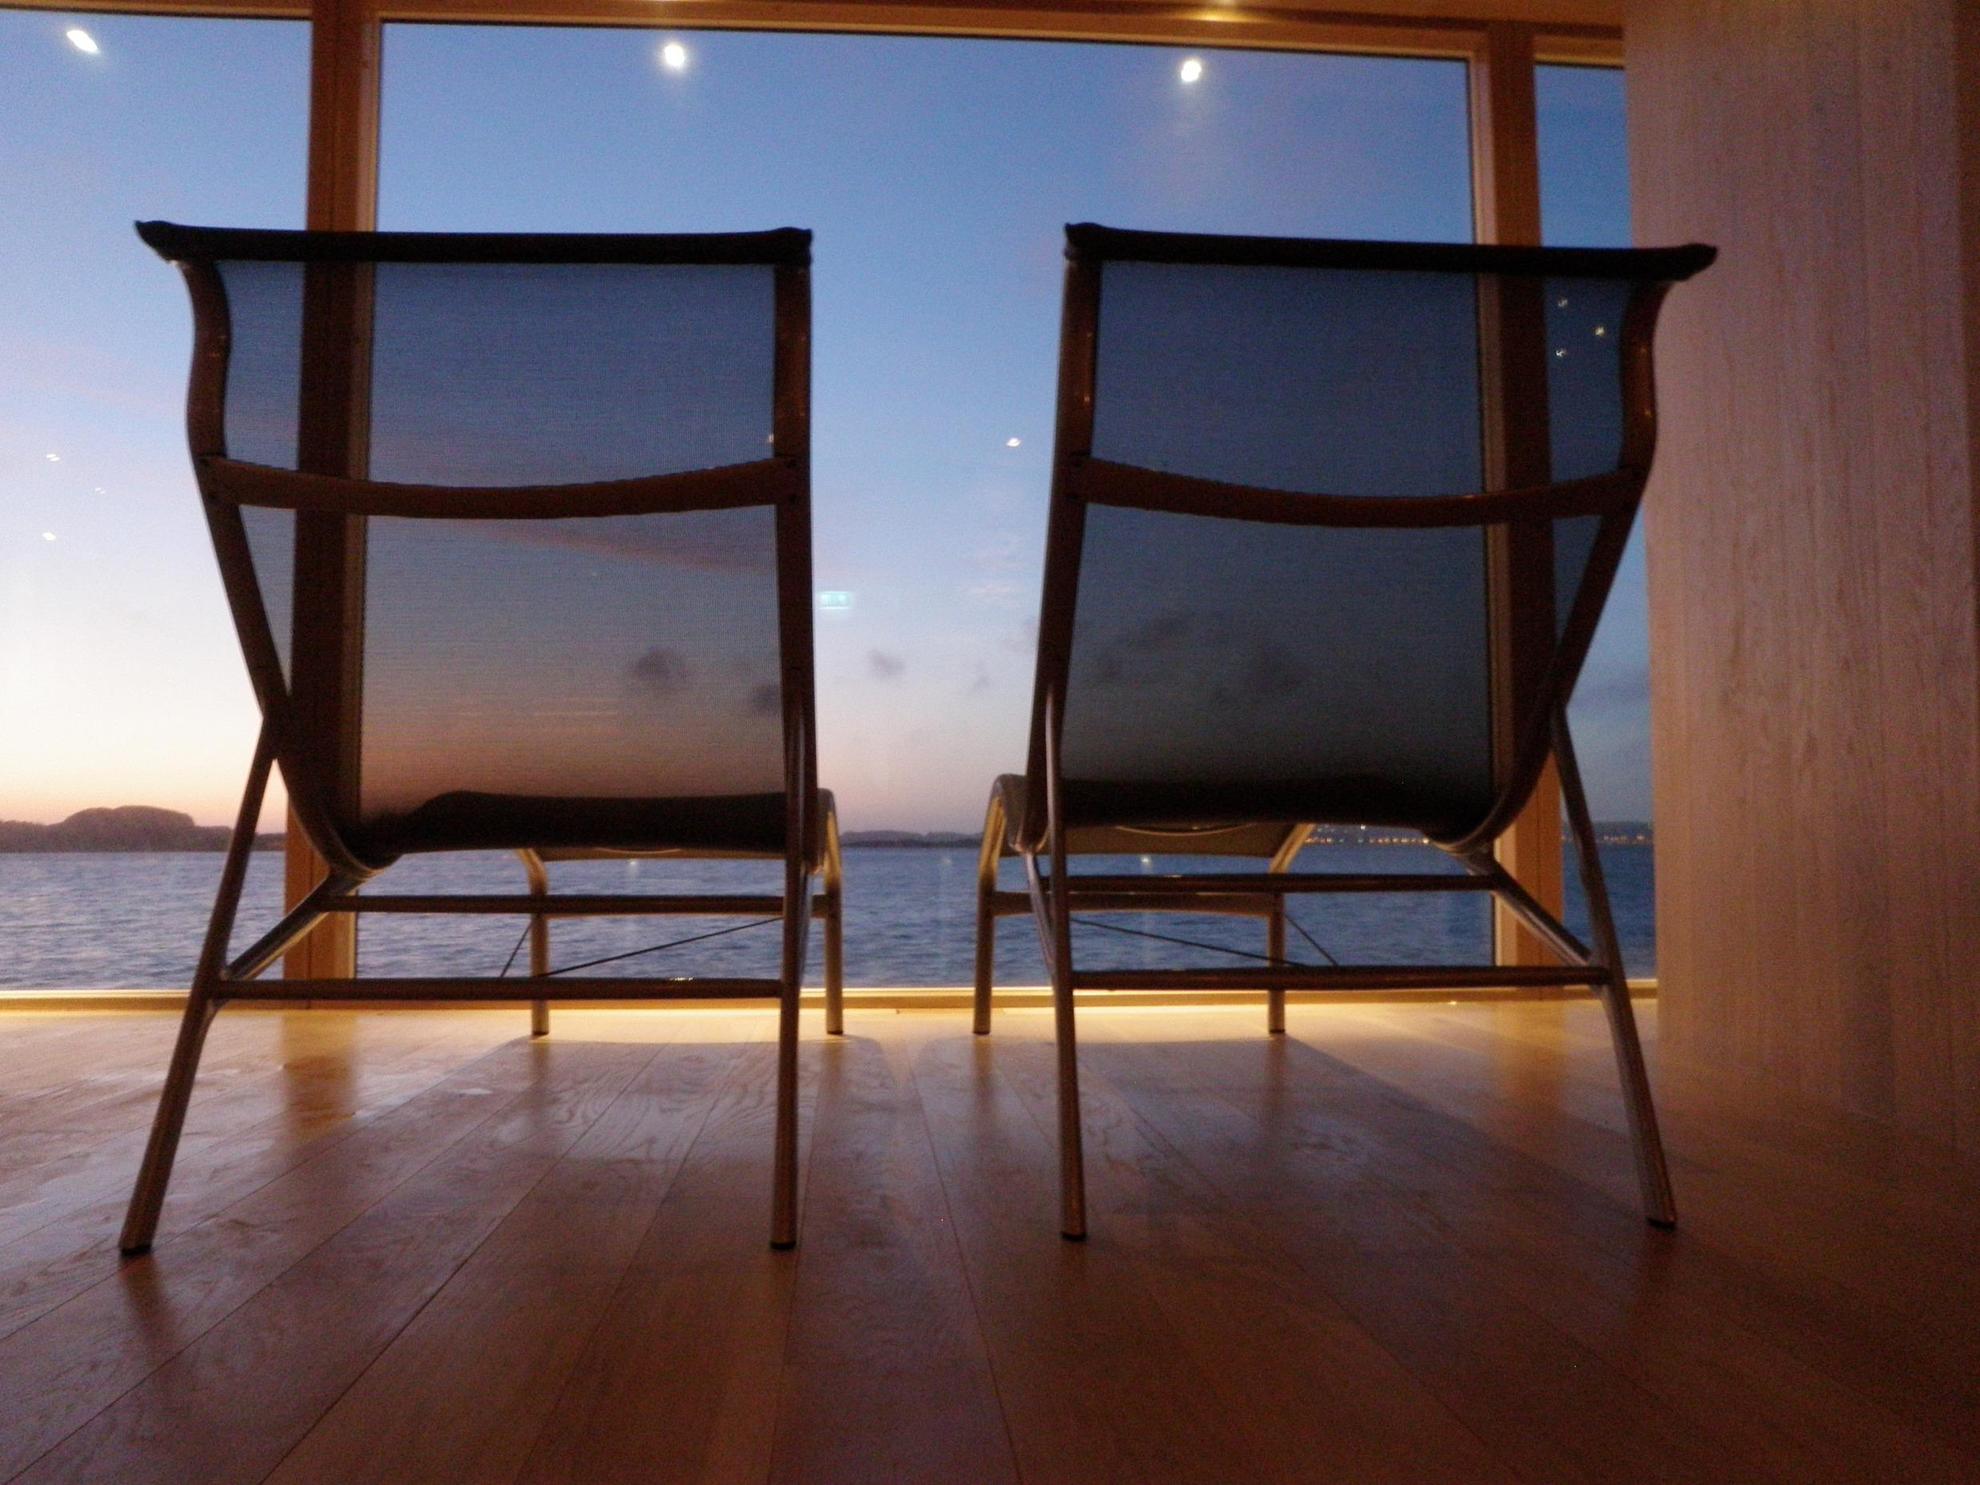 Two empty lounge chairs in front of a window looking out at the ocean by Bohuslän province.